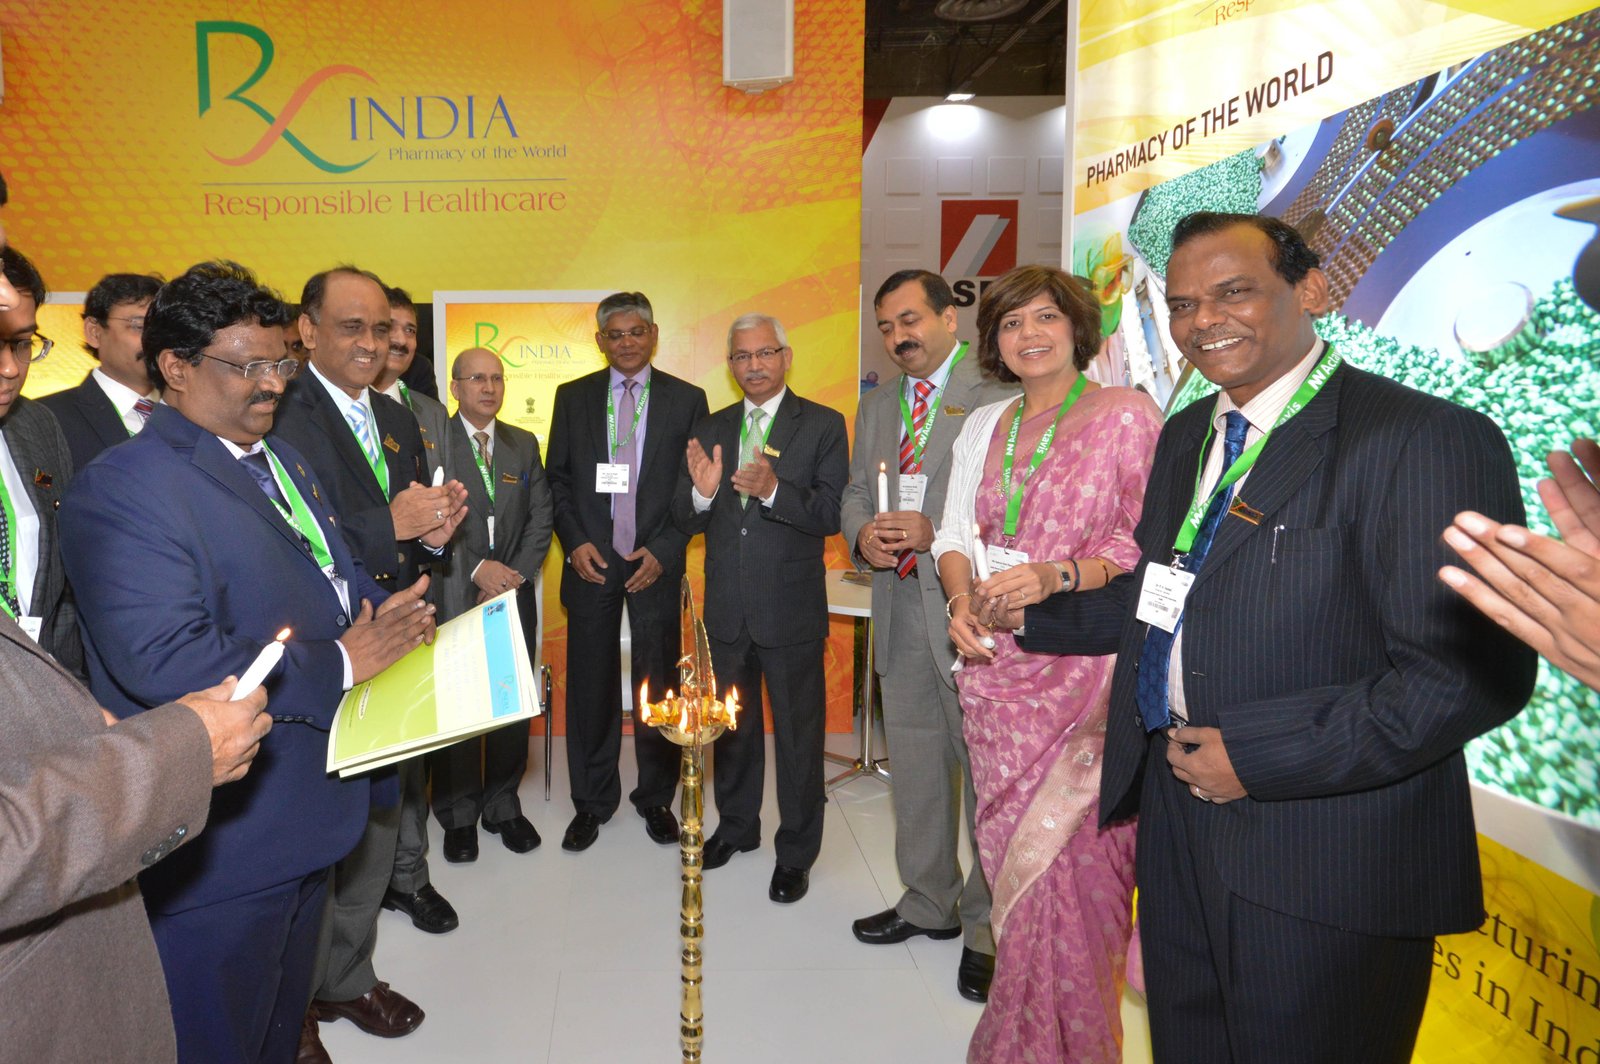 The India Pavilion was inaugurated by Mr Rajeev Kher, commerce secretary, Government of India along with Mr Arun Kumar Singh, ambassador of India to France, Dr G N Singh, drugs controller general of India